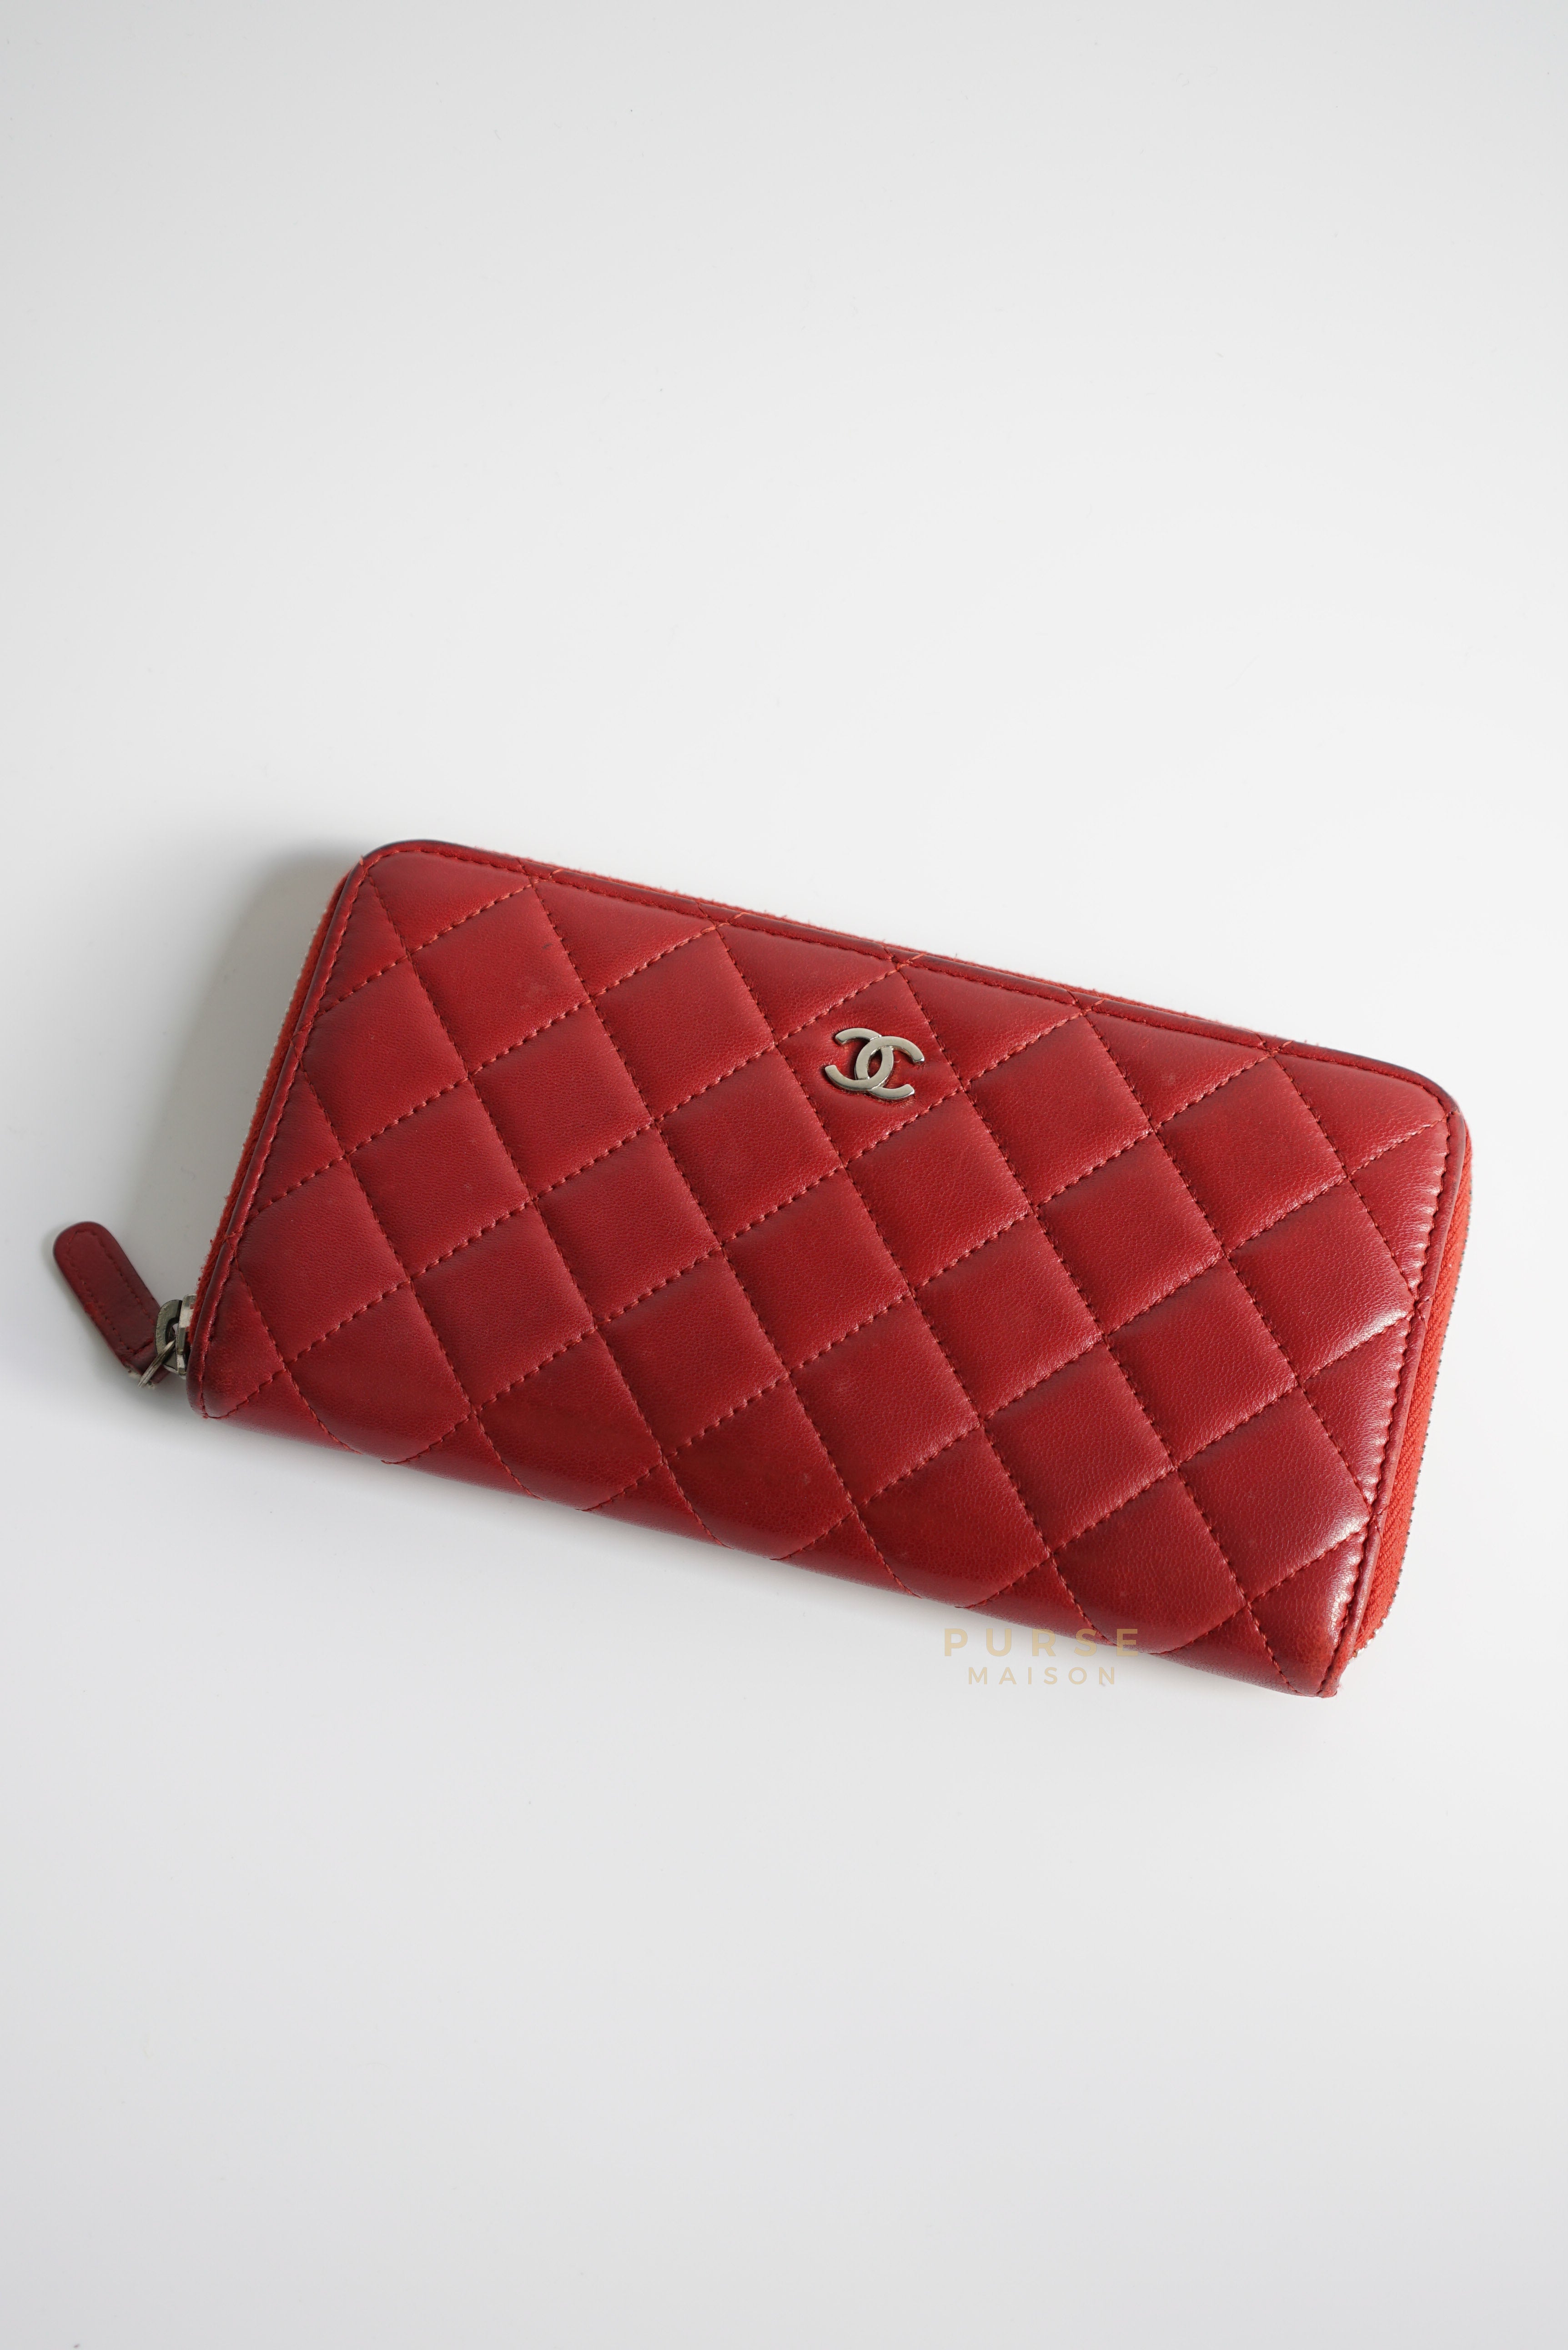 Classic Long Zipped Wallet Red Lambskin Leather & Silver Hardware Series 15 | Purse Maison Luxury Bags Shop